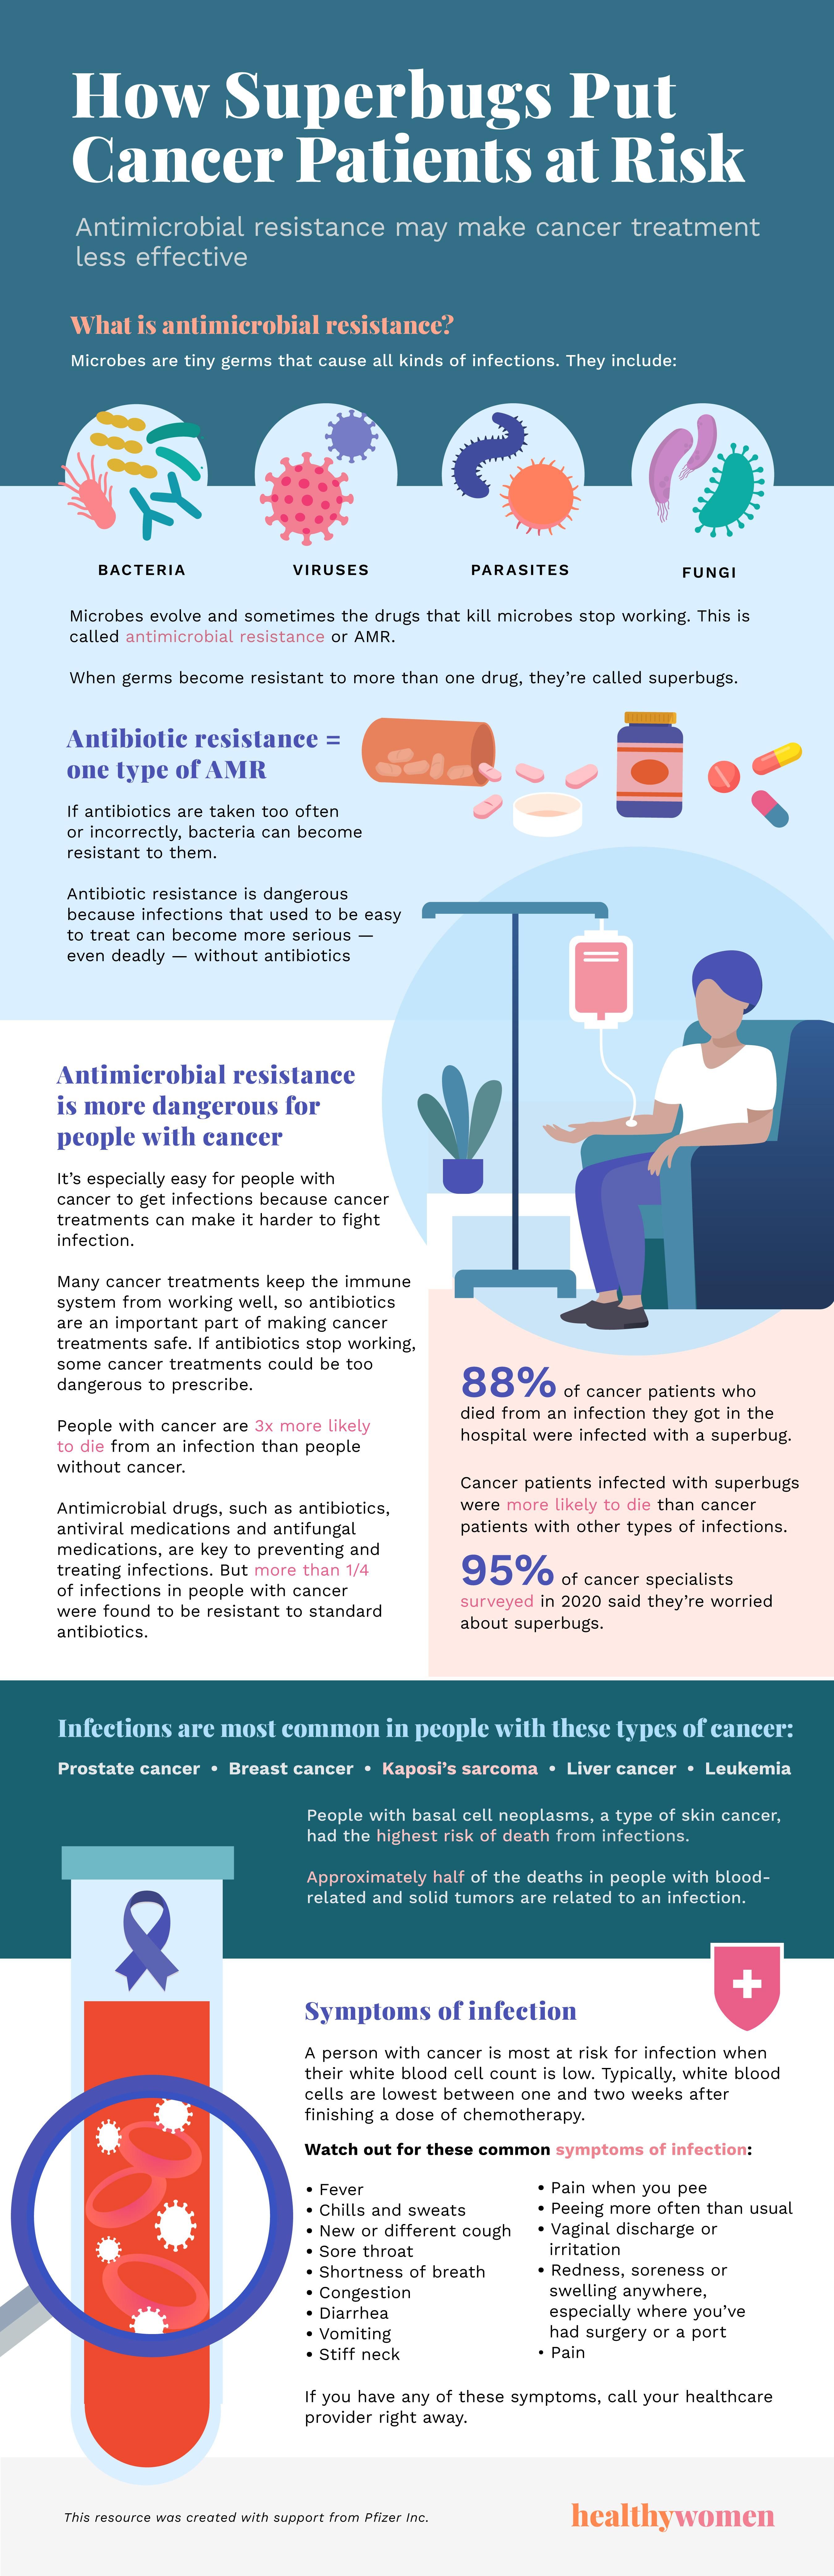 How Superbugs Put Cancer Patients at Risk Infographic: Click image to open PDF